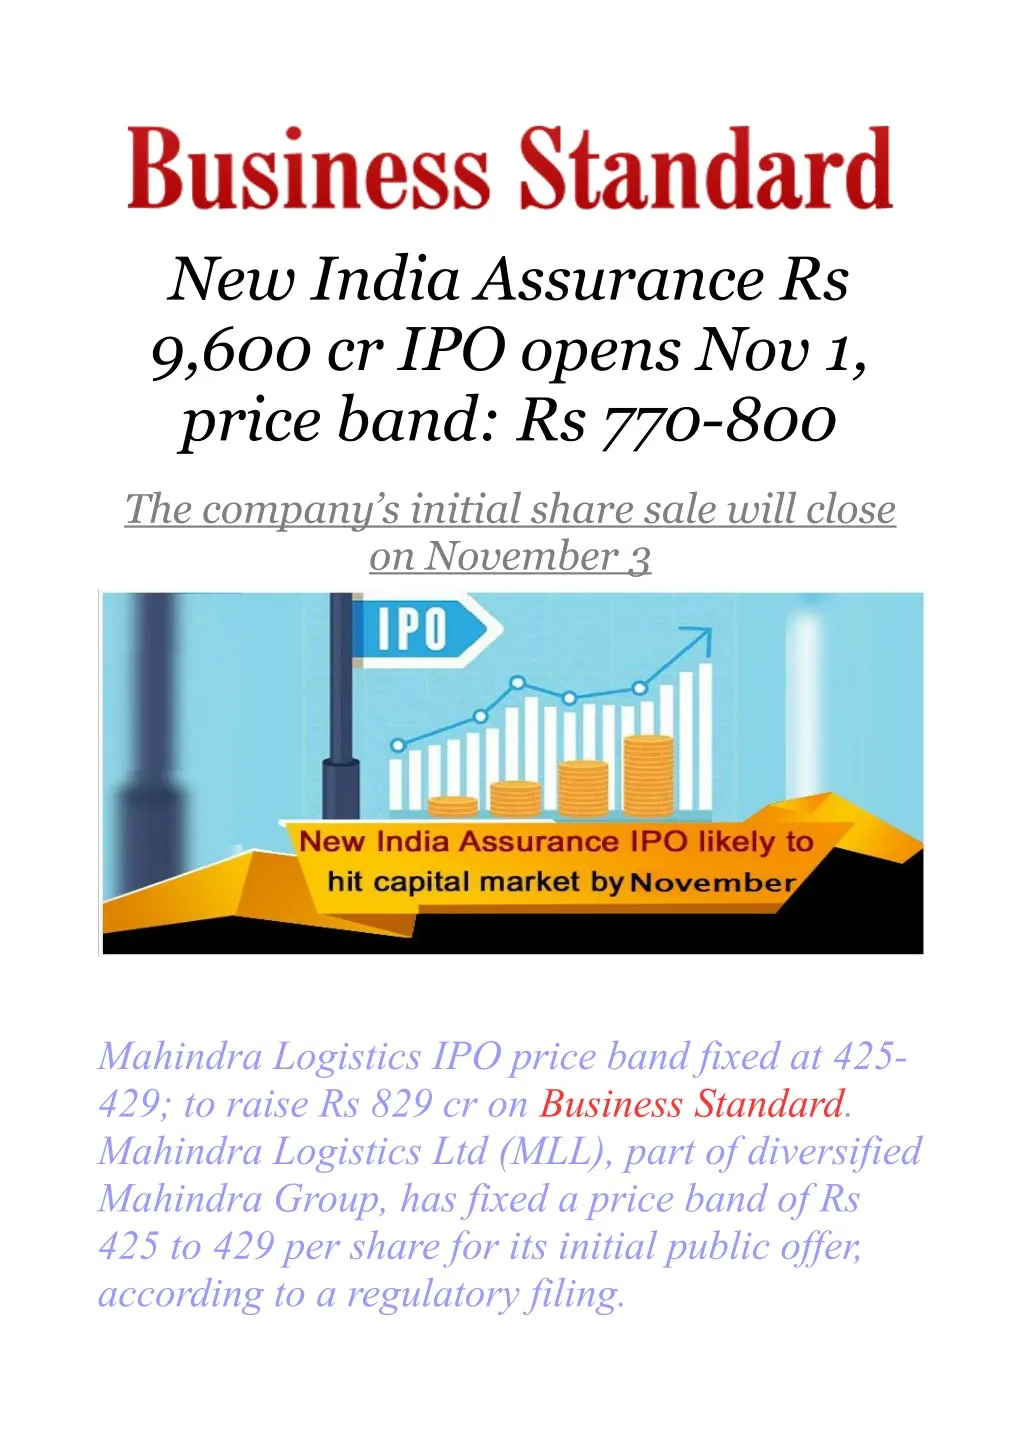 PPT - New India Assurance Rs 9,600 cr IPO opens Nov 1, price band: Rs